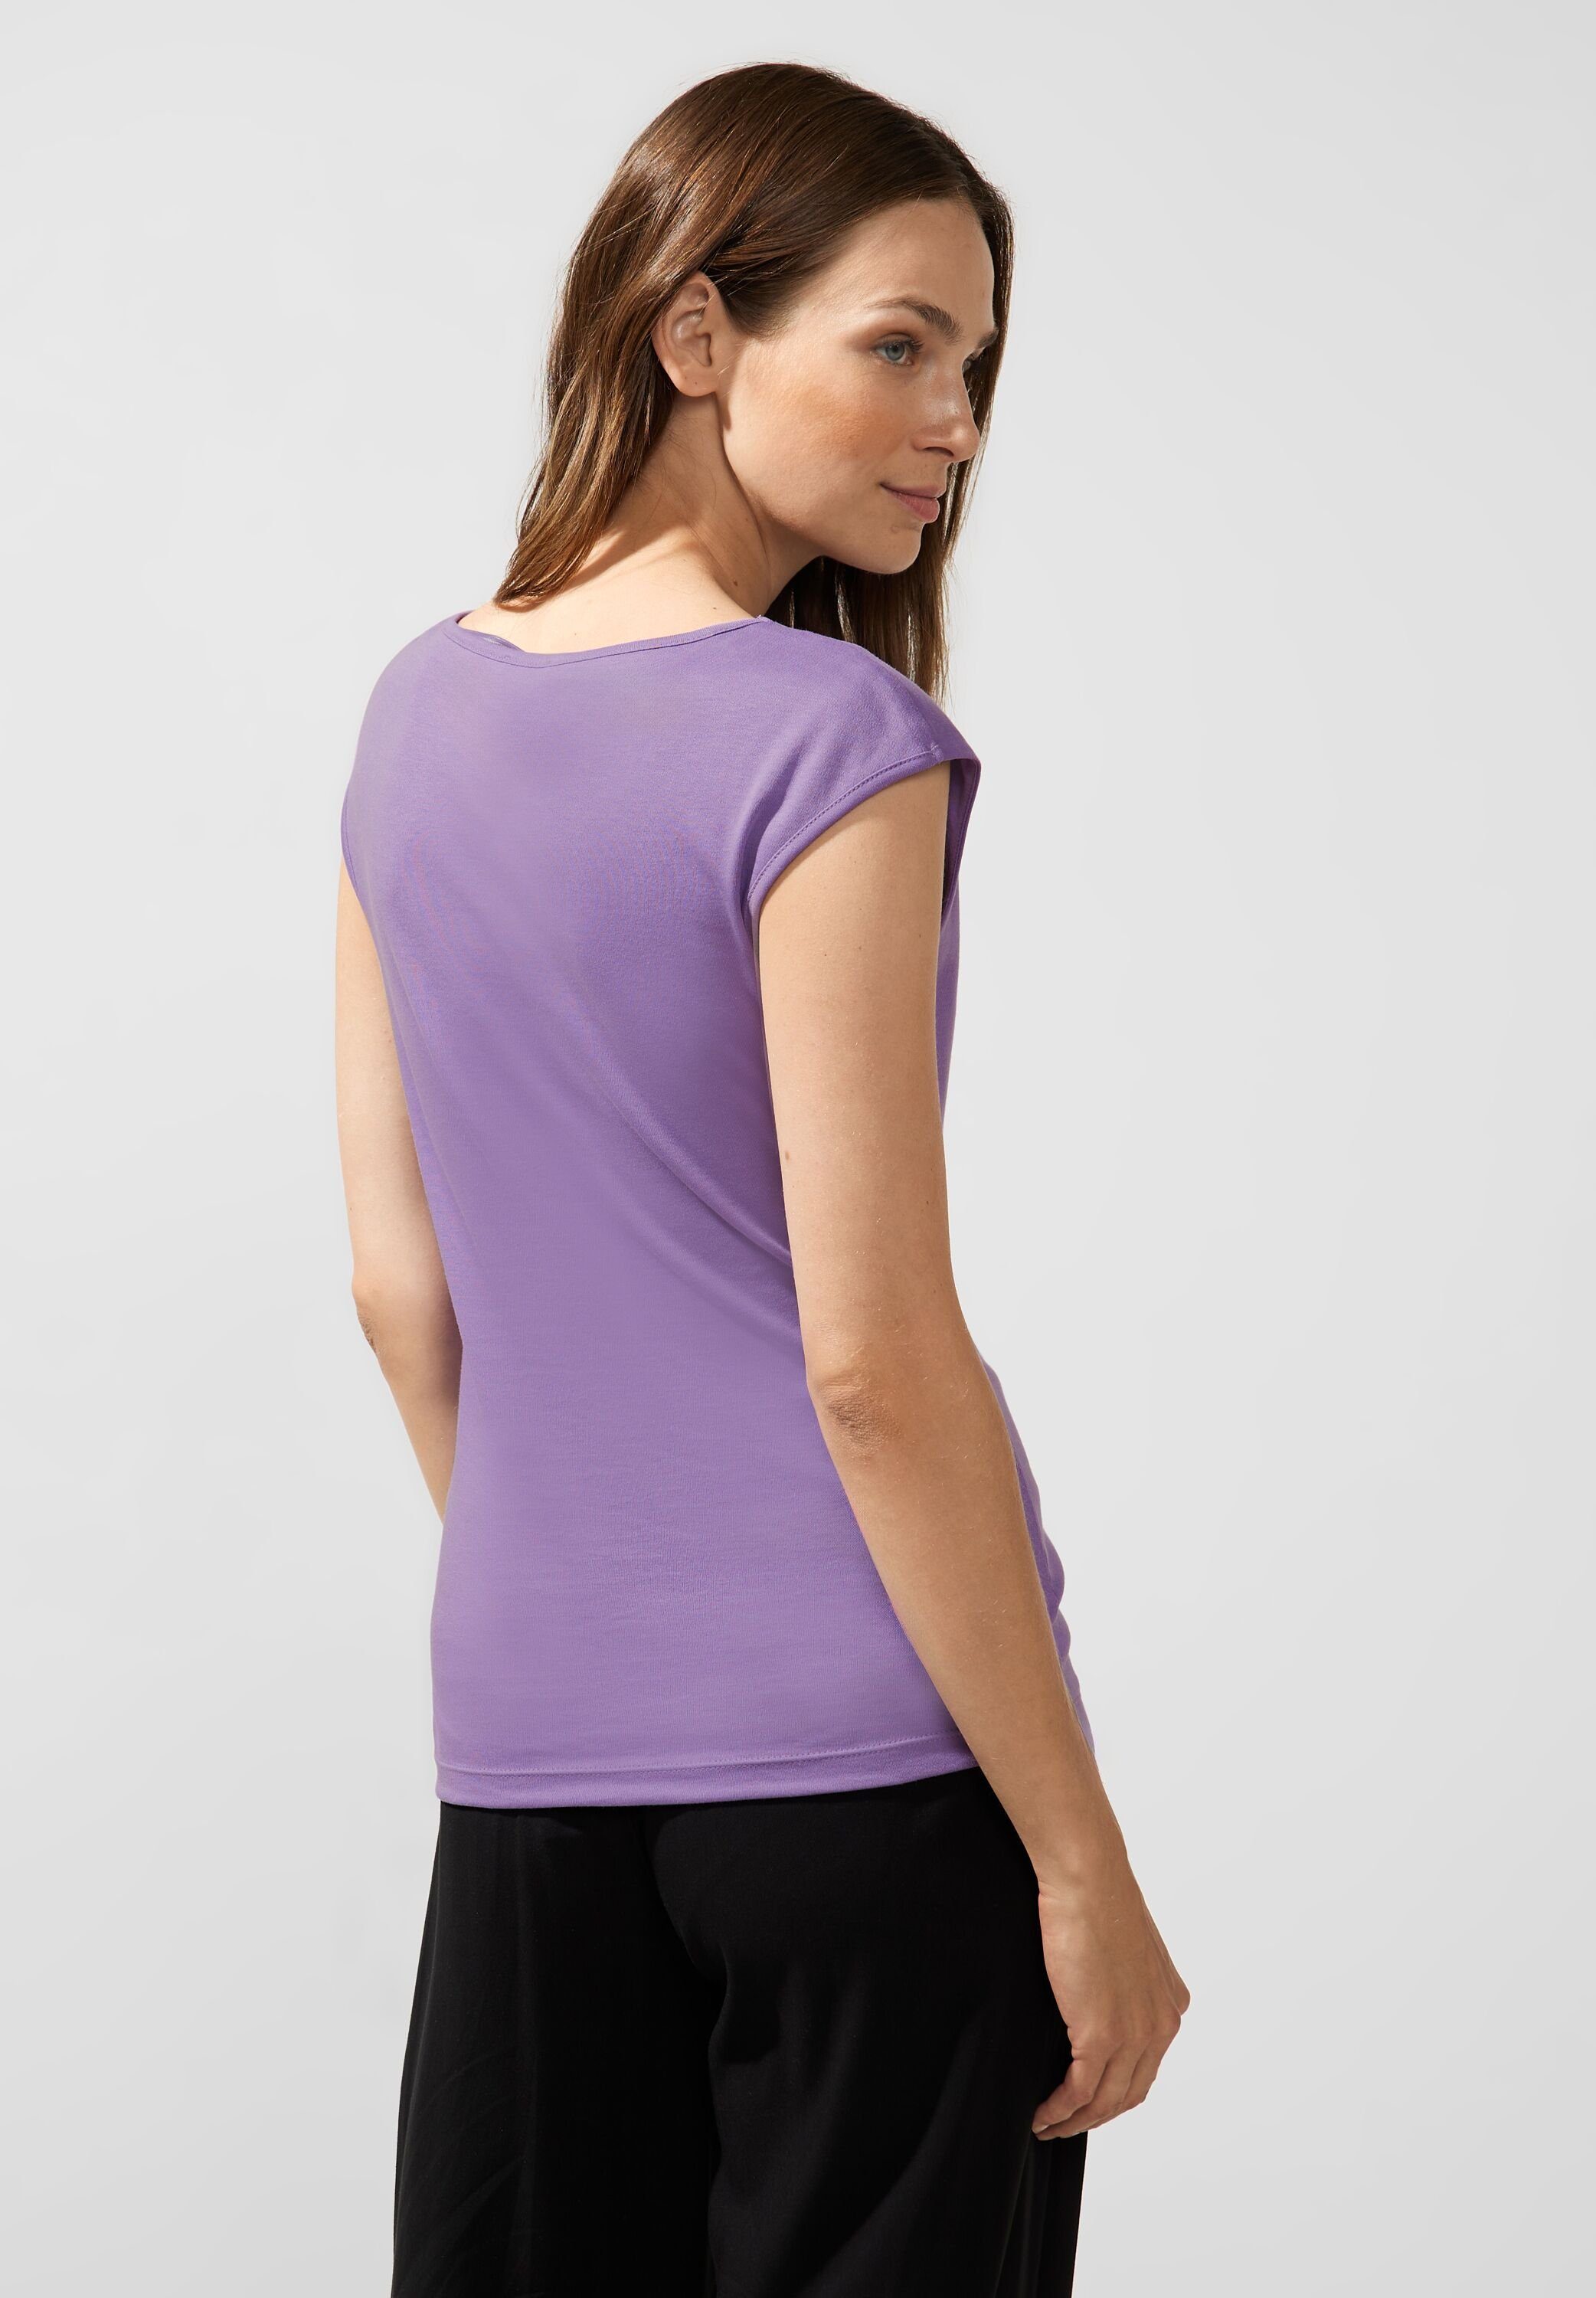 STREET ONE T-Shirt in Unifarbe lilac lupine